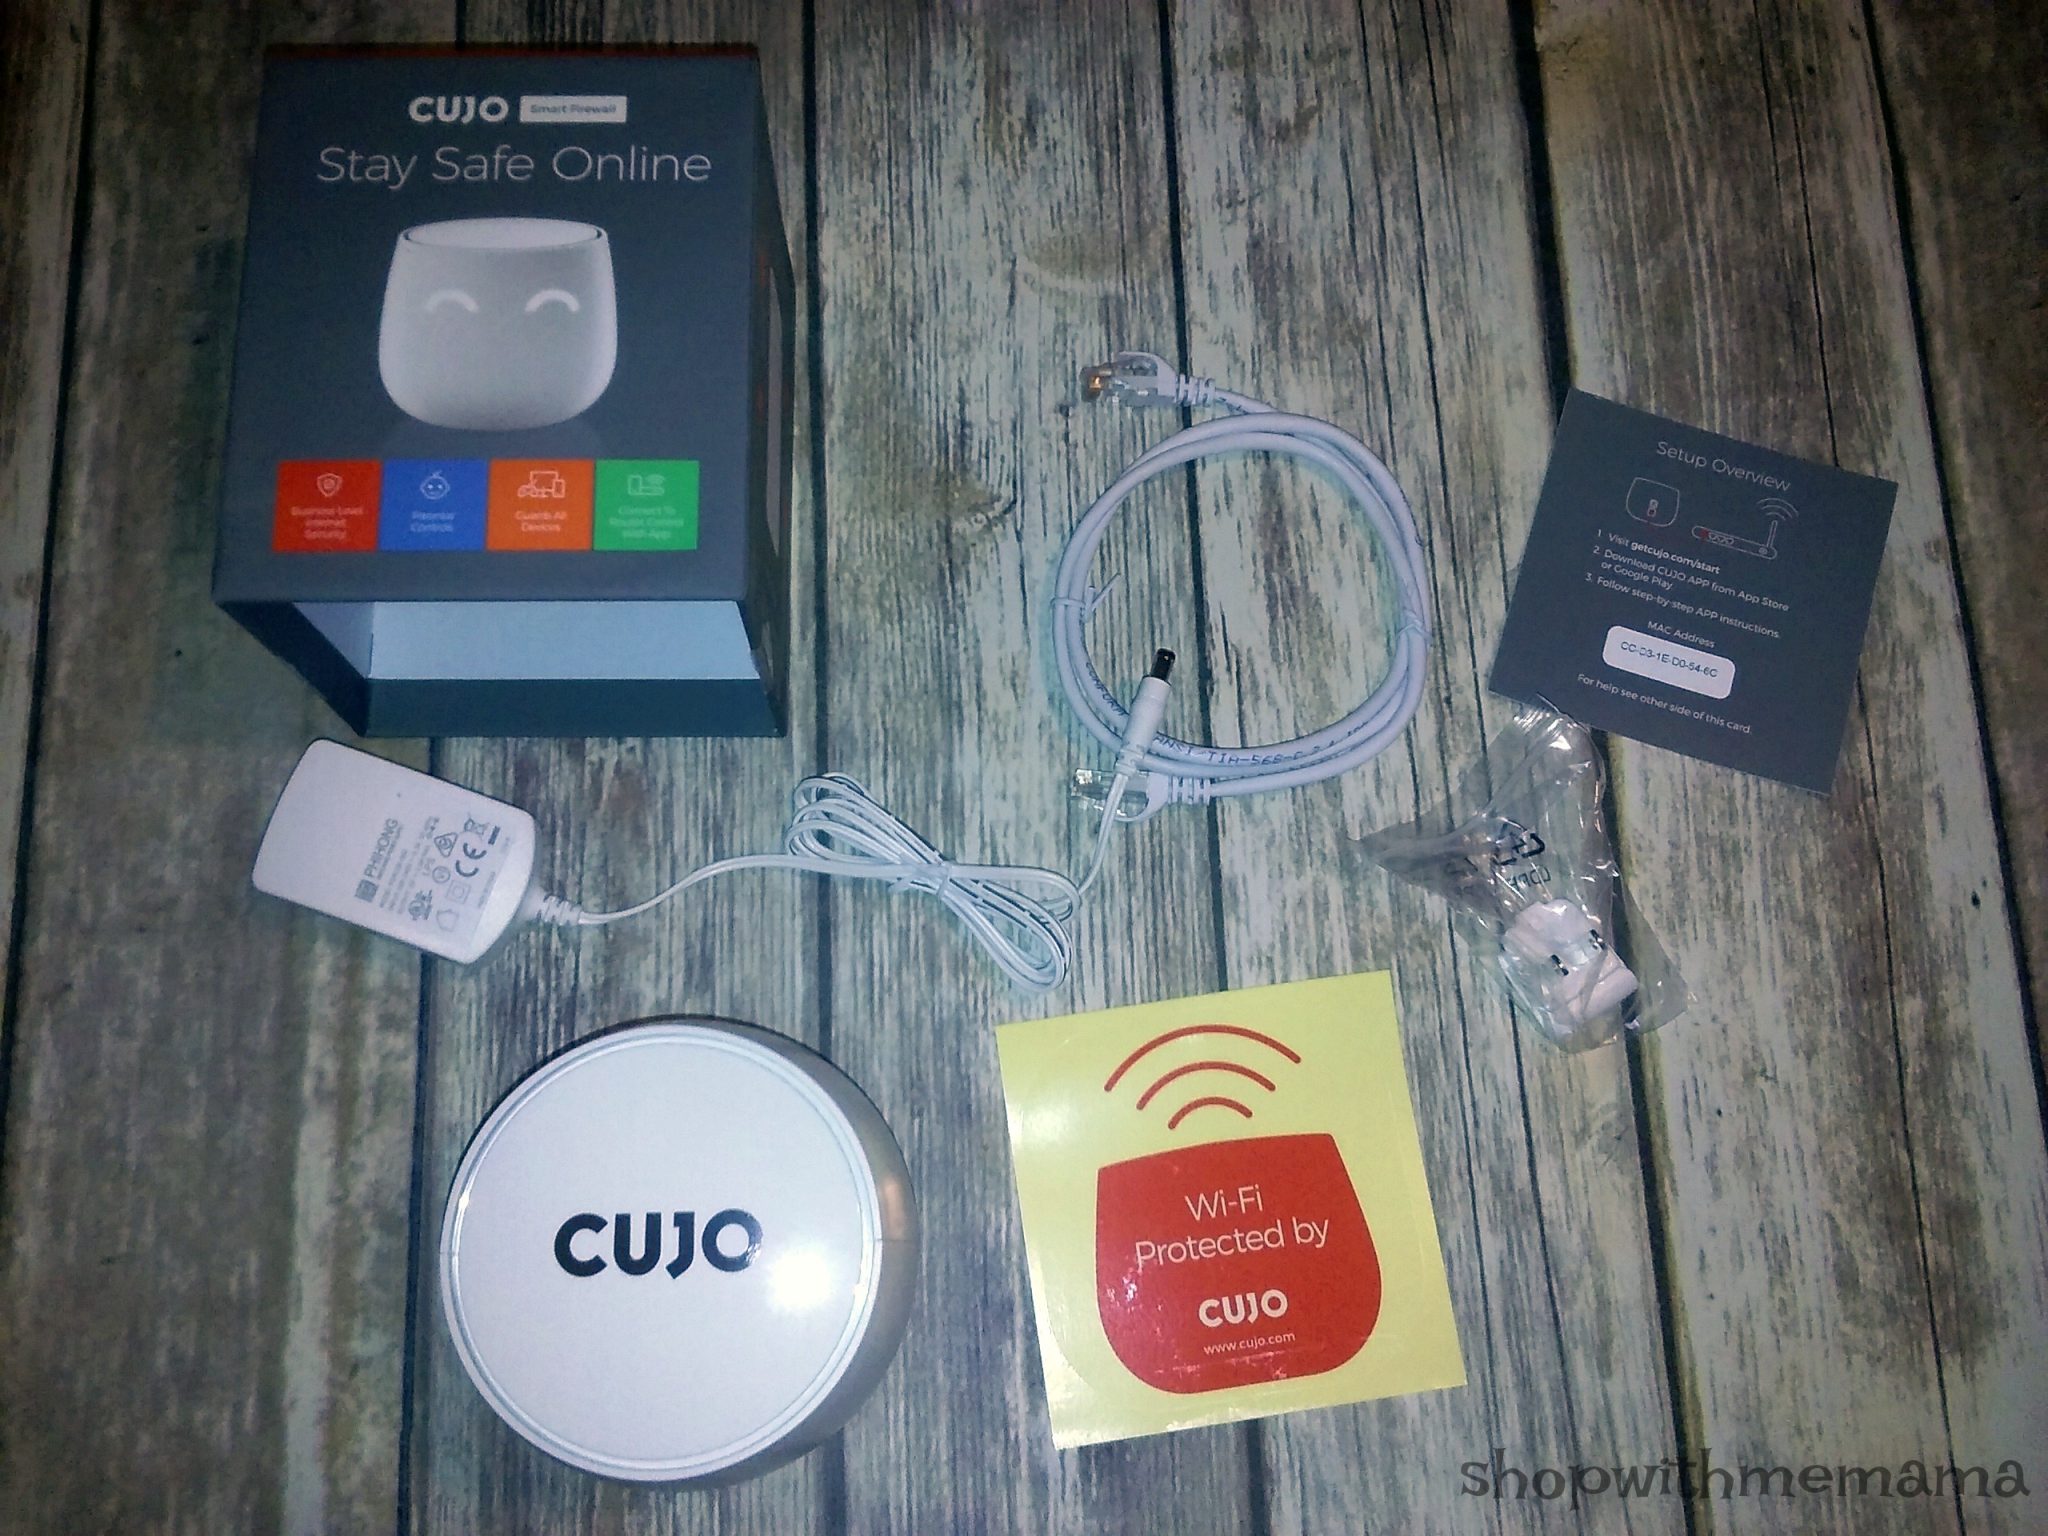 Protect Your Home Network With CUJO Smart Internet Firewall